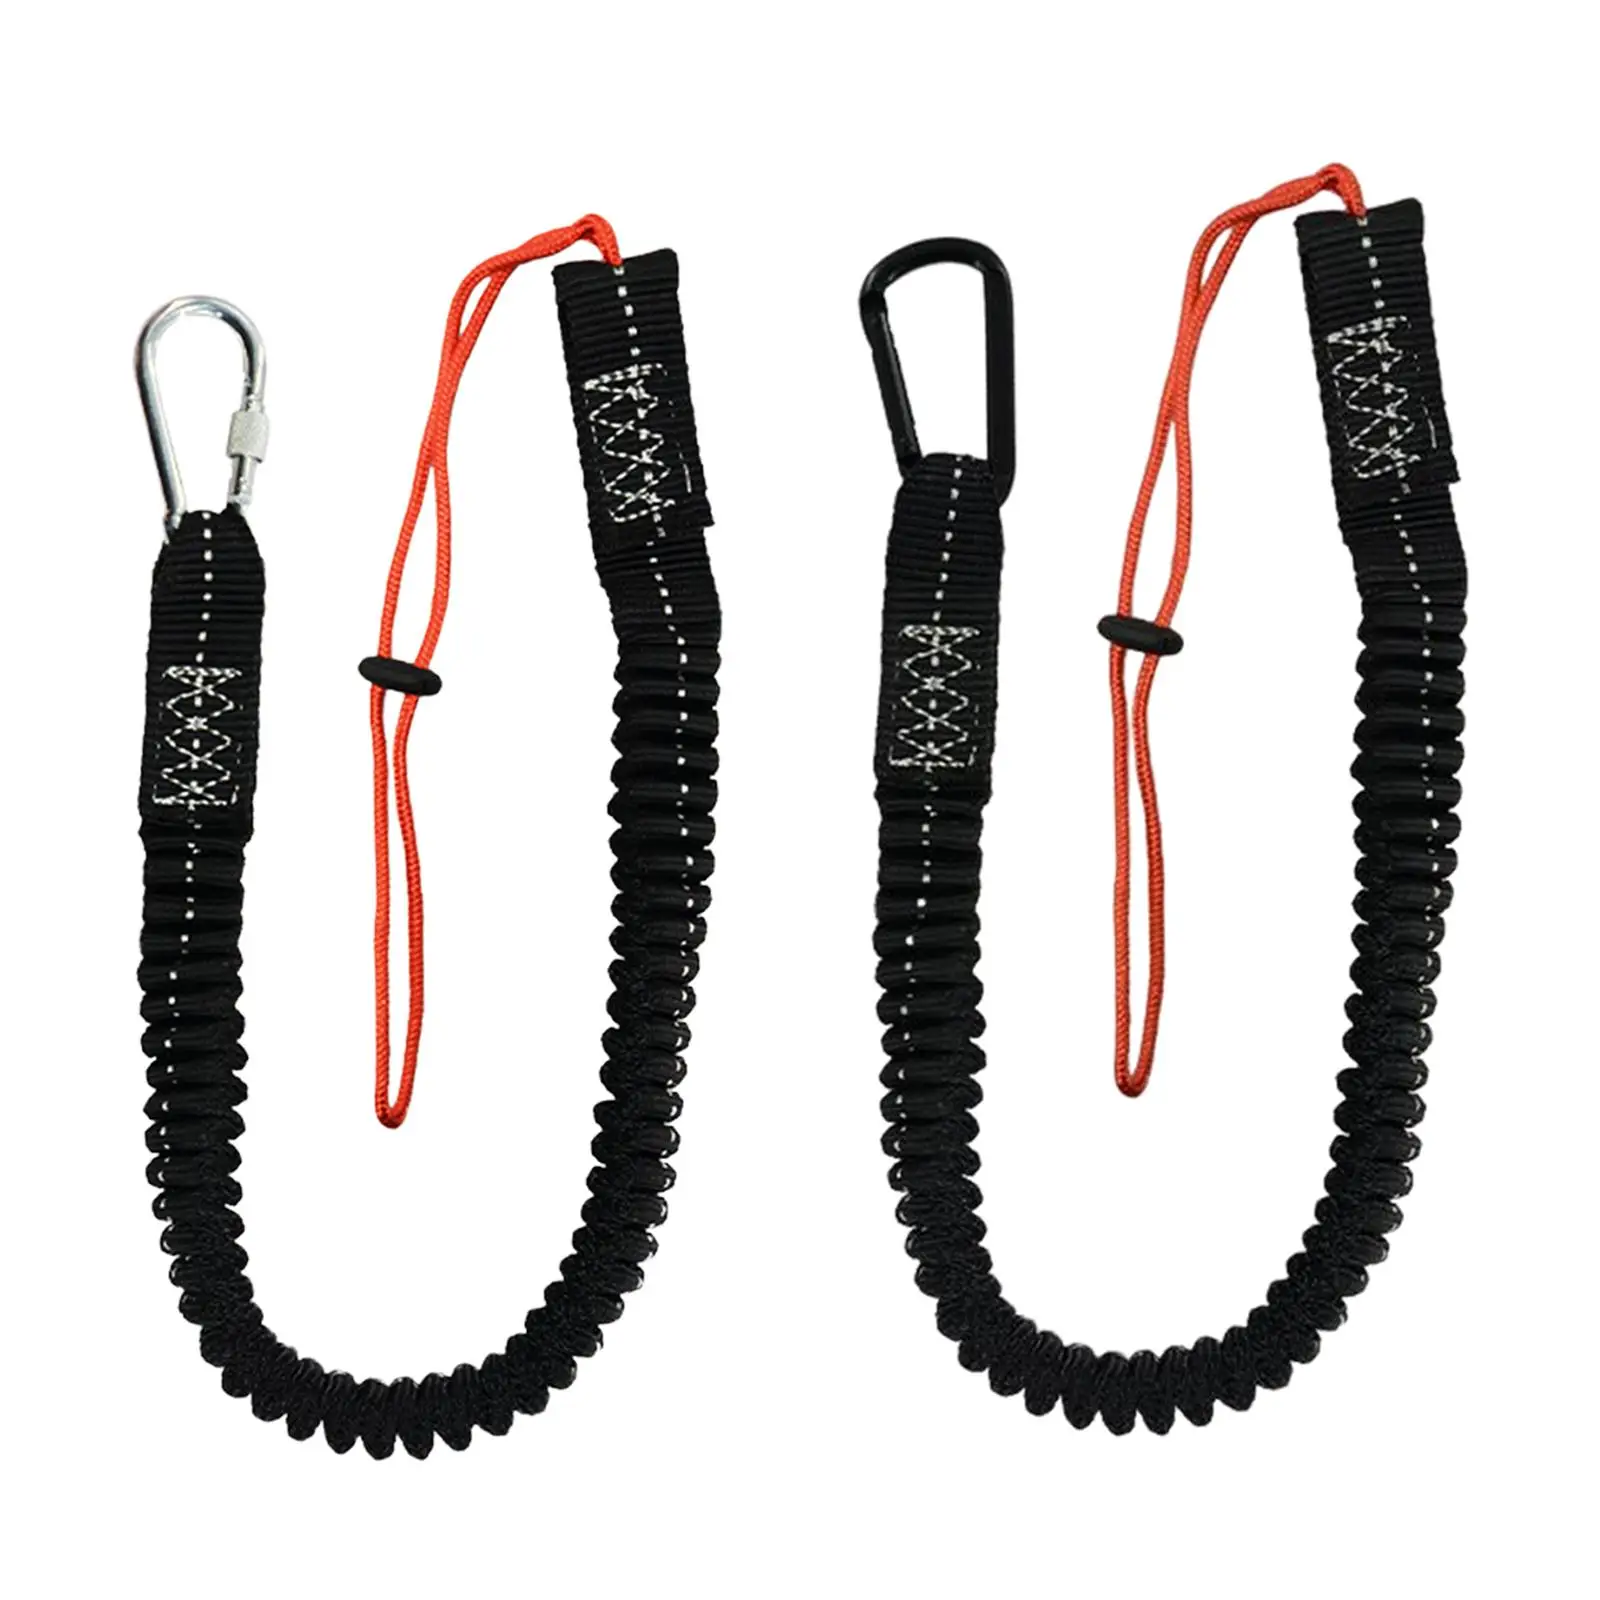 Tool Lanyard Safety Rope with Lock Carabiner Telescopic Shock Cord Stopper for Mountaineering Construction Rappelling Outdoor